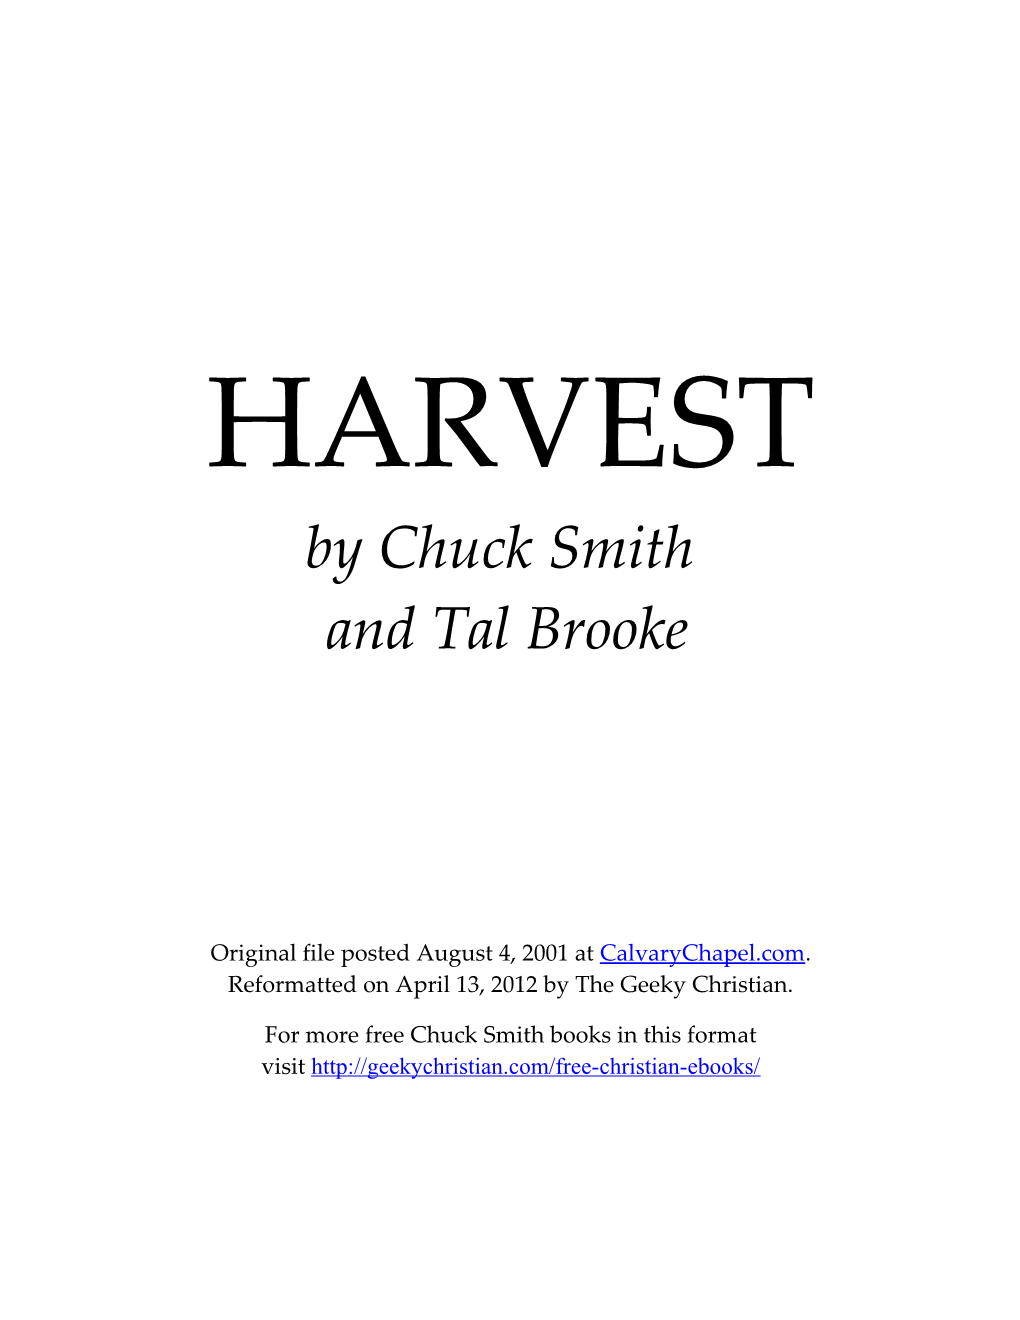 HARVEST by Chuck Smith and Tal Brooke